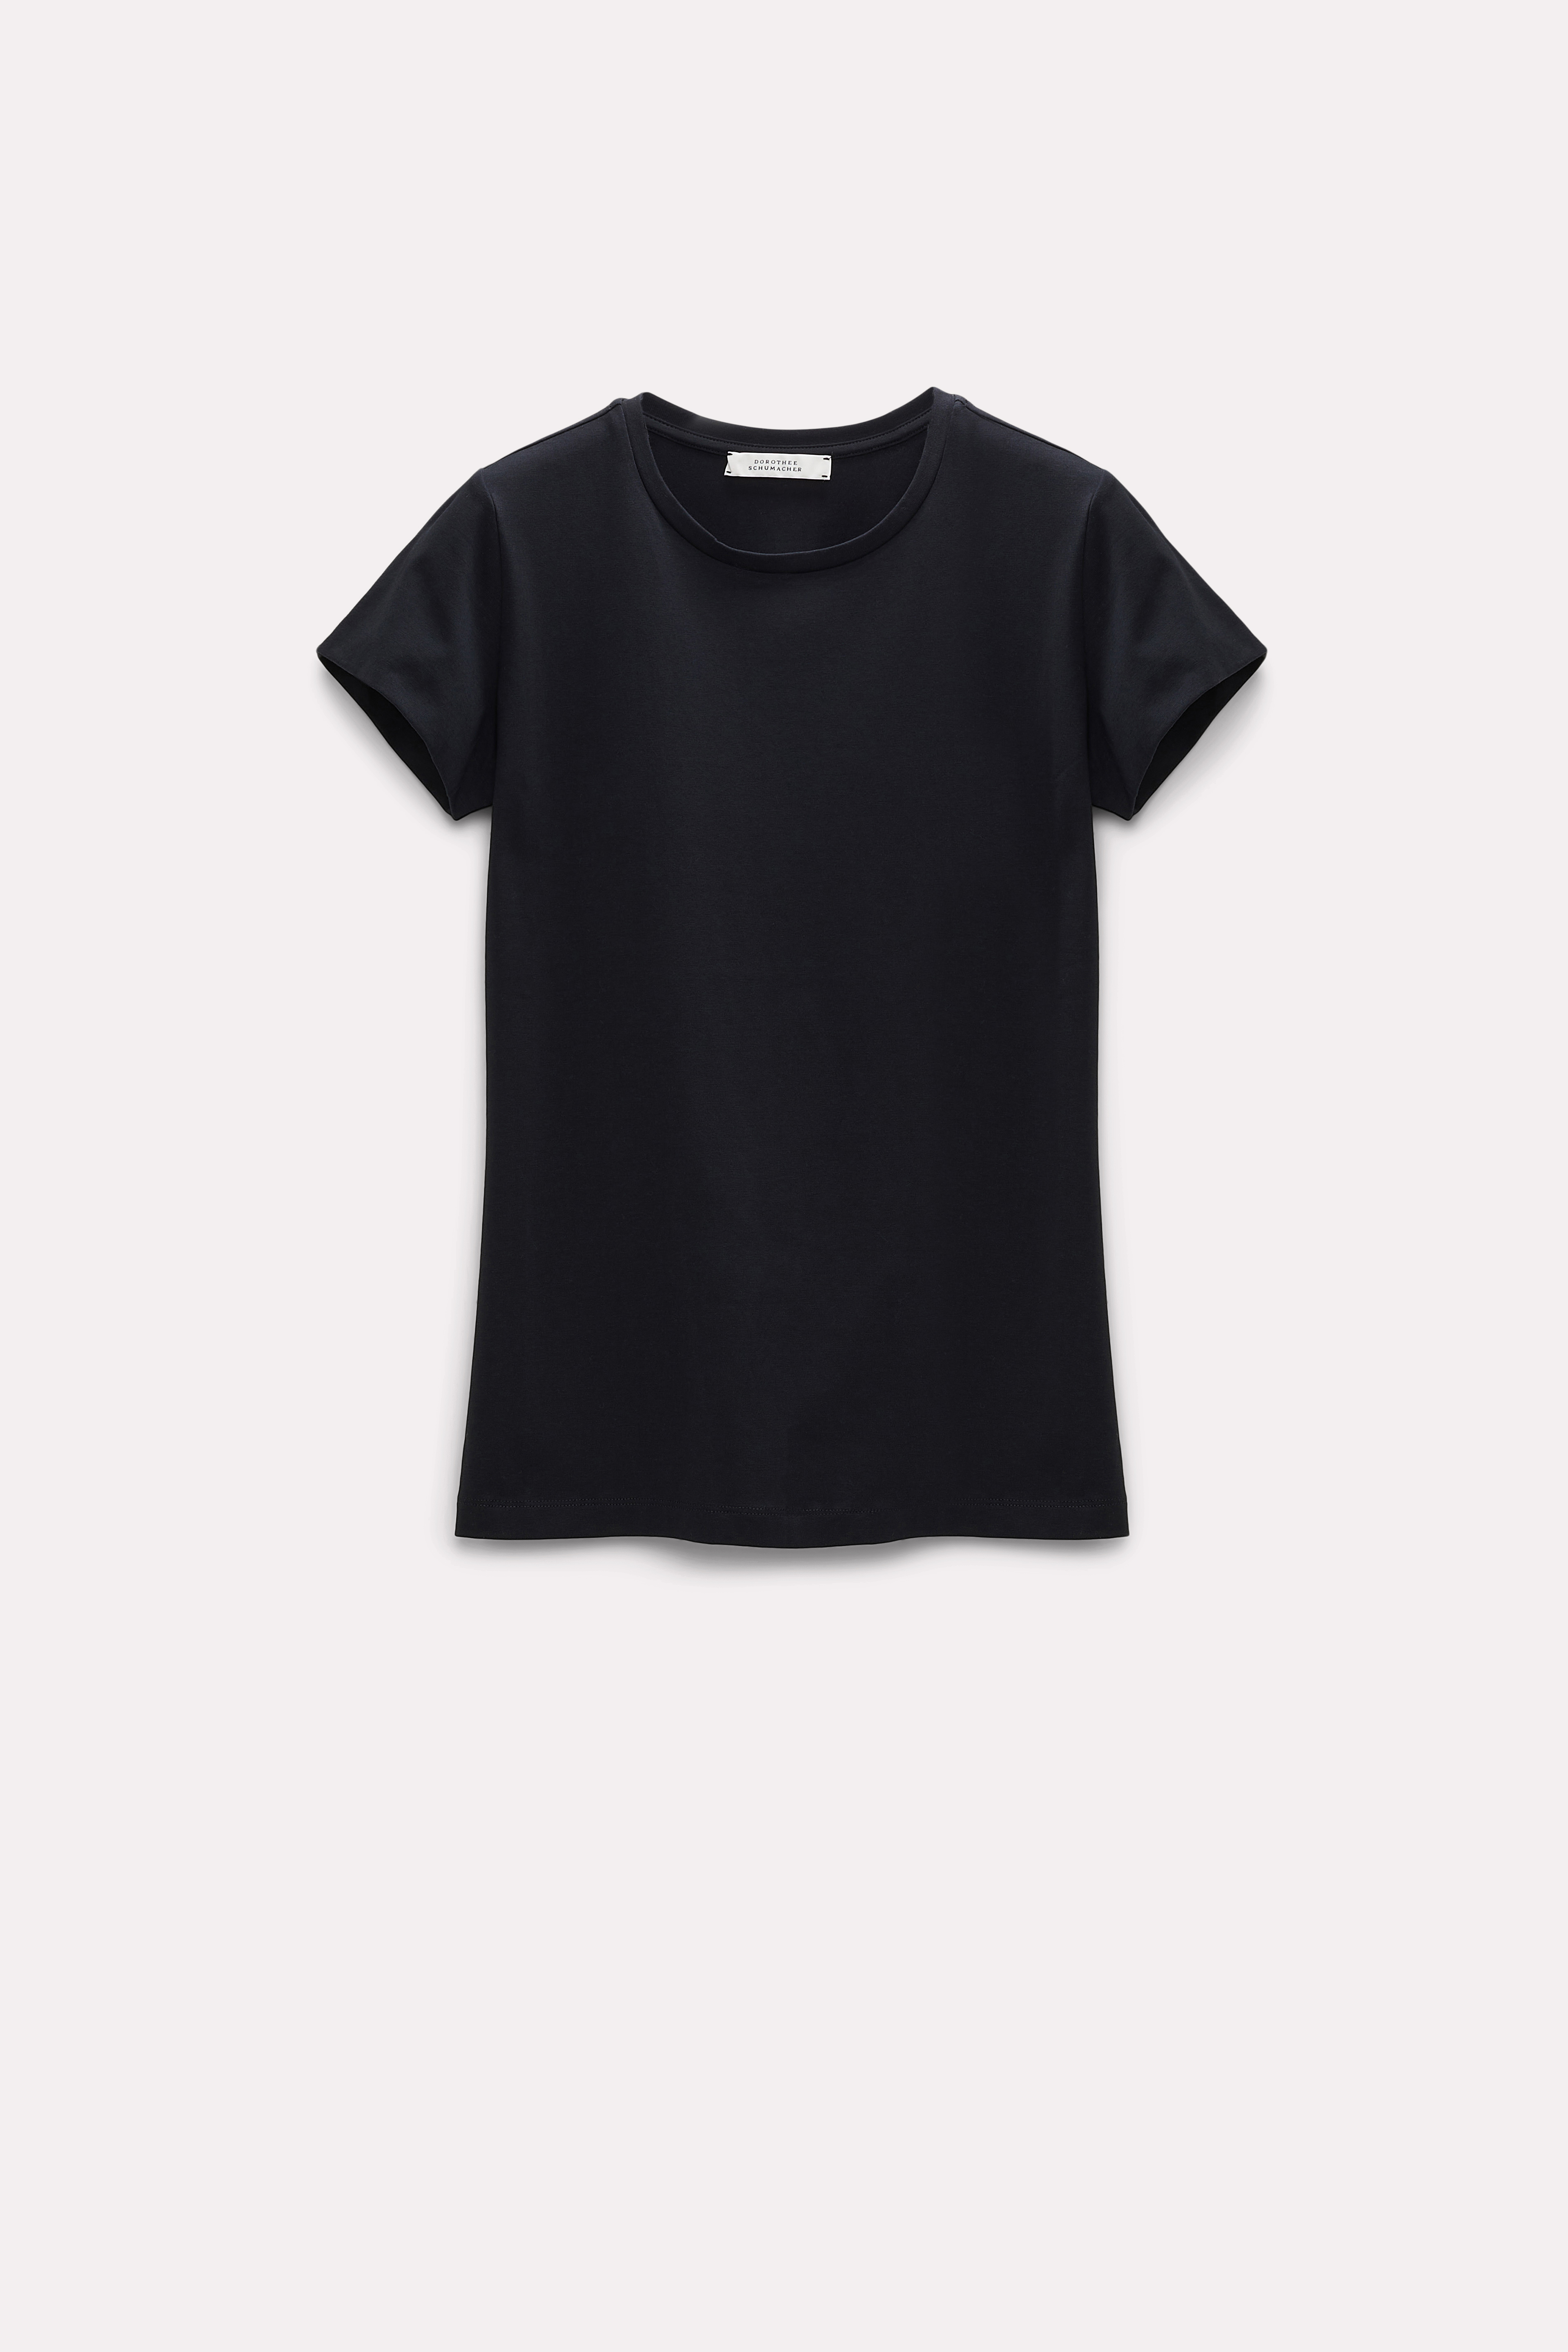 BASIC T-SHIRT IN COTTON JERSEY Basic on sale 2022 2